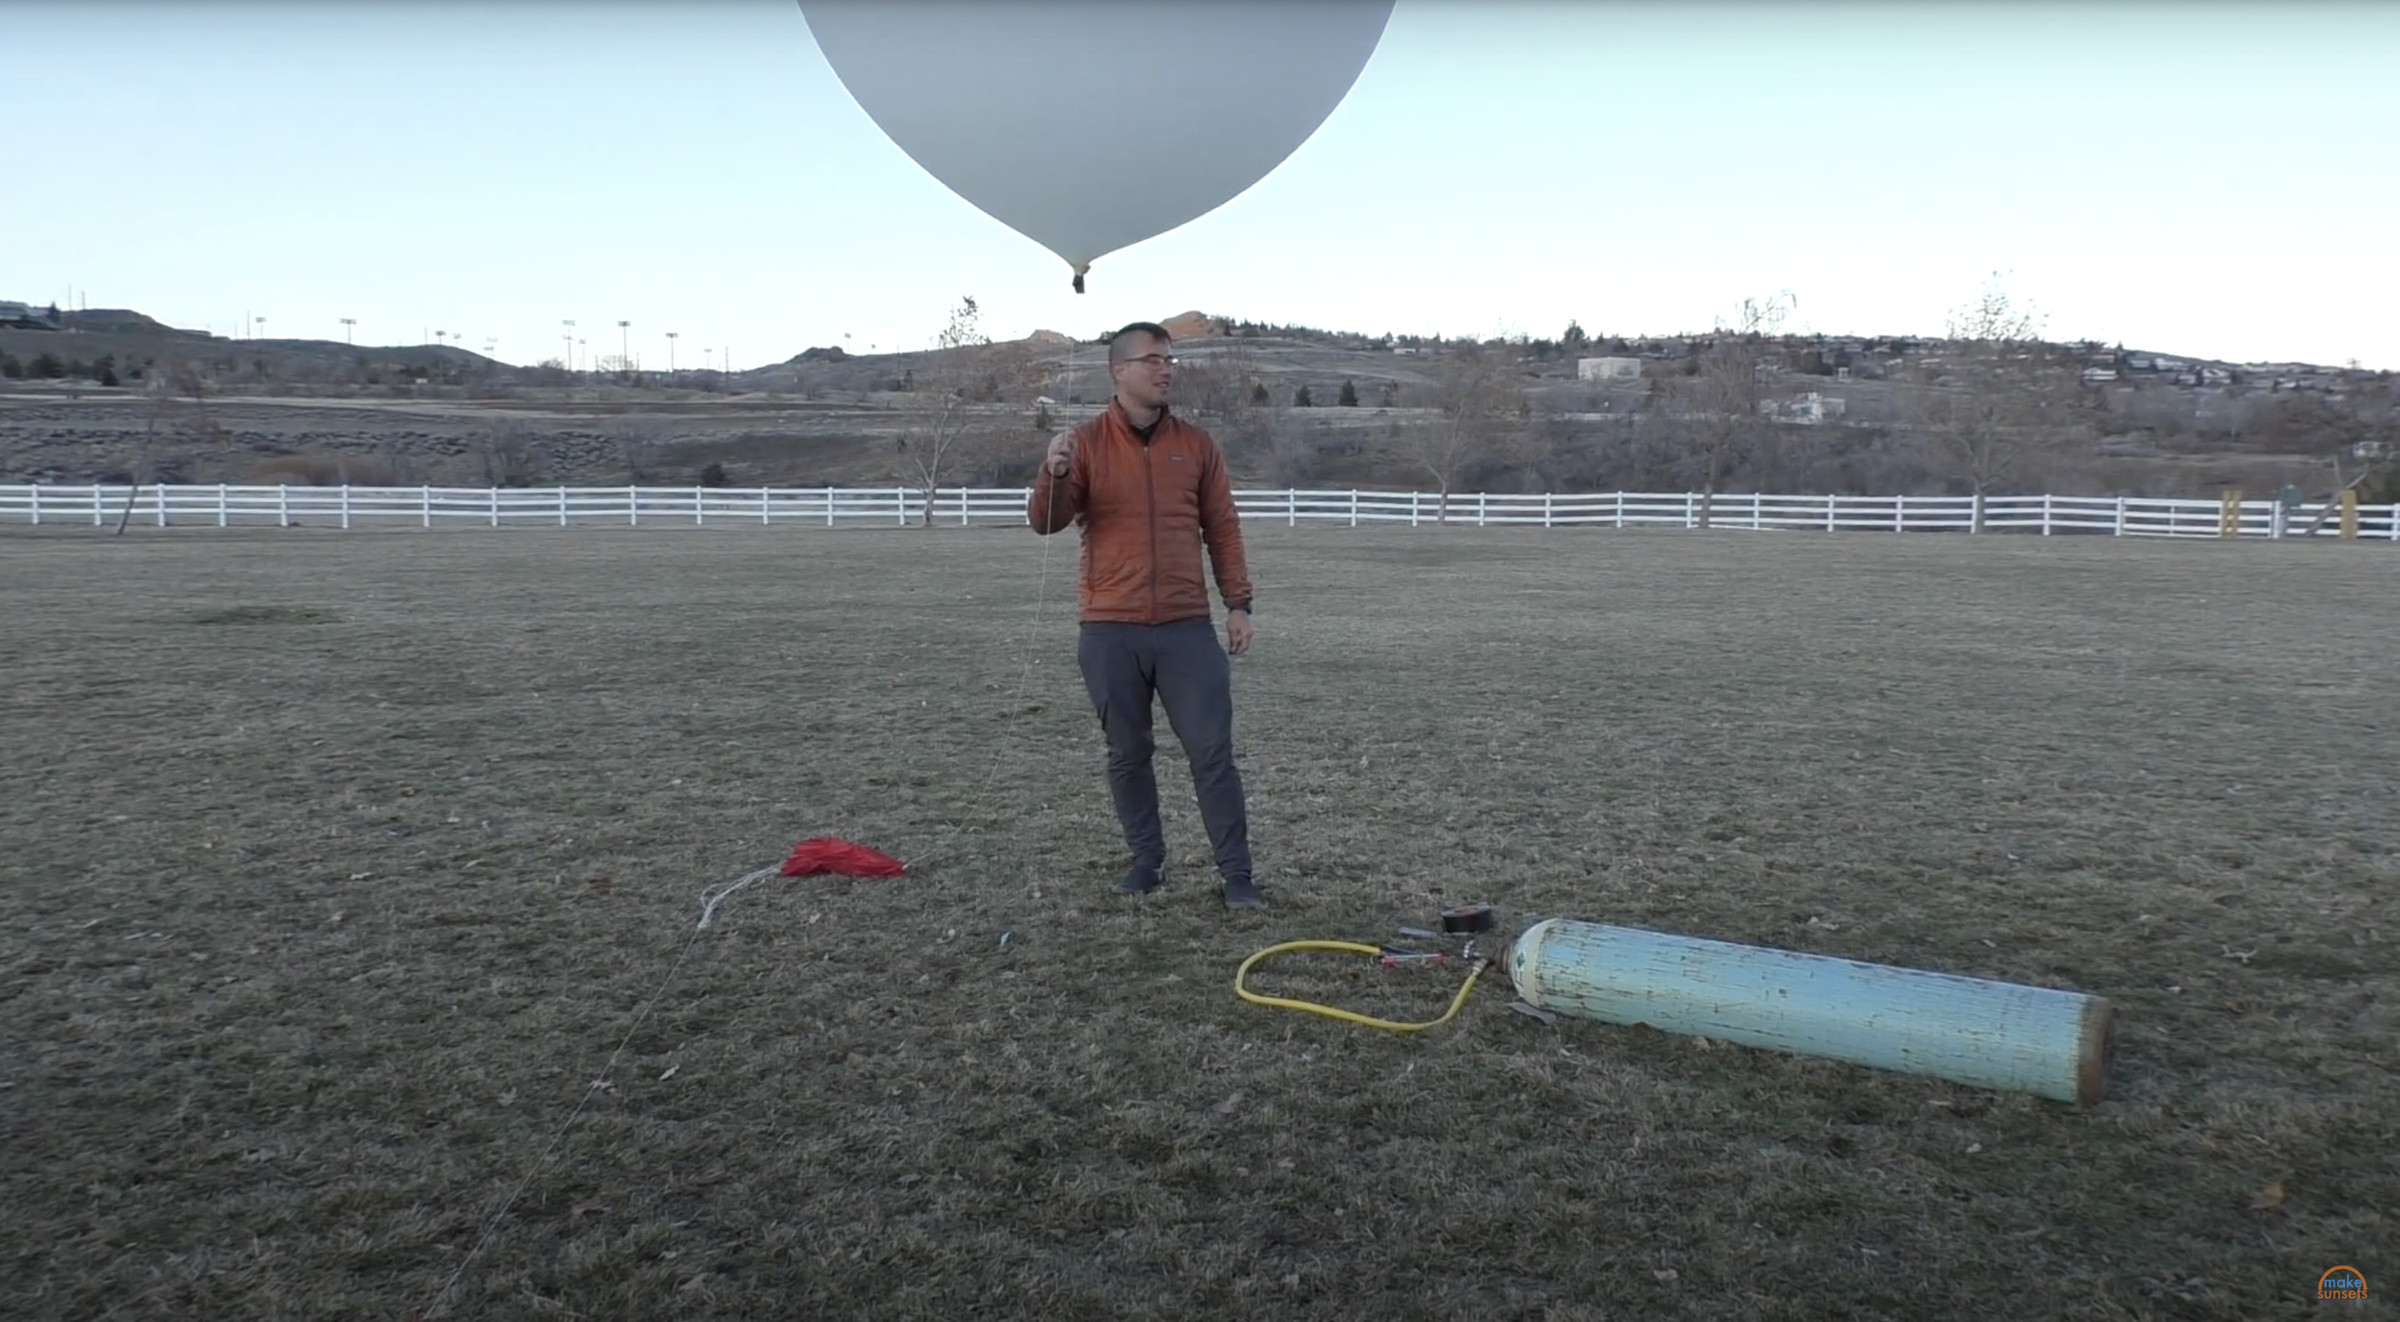 In the middle of a lawn stands a man with a large white weather balloon.